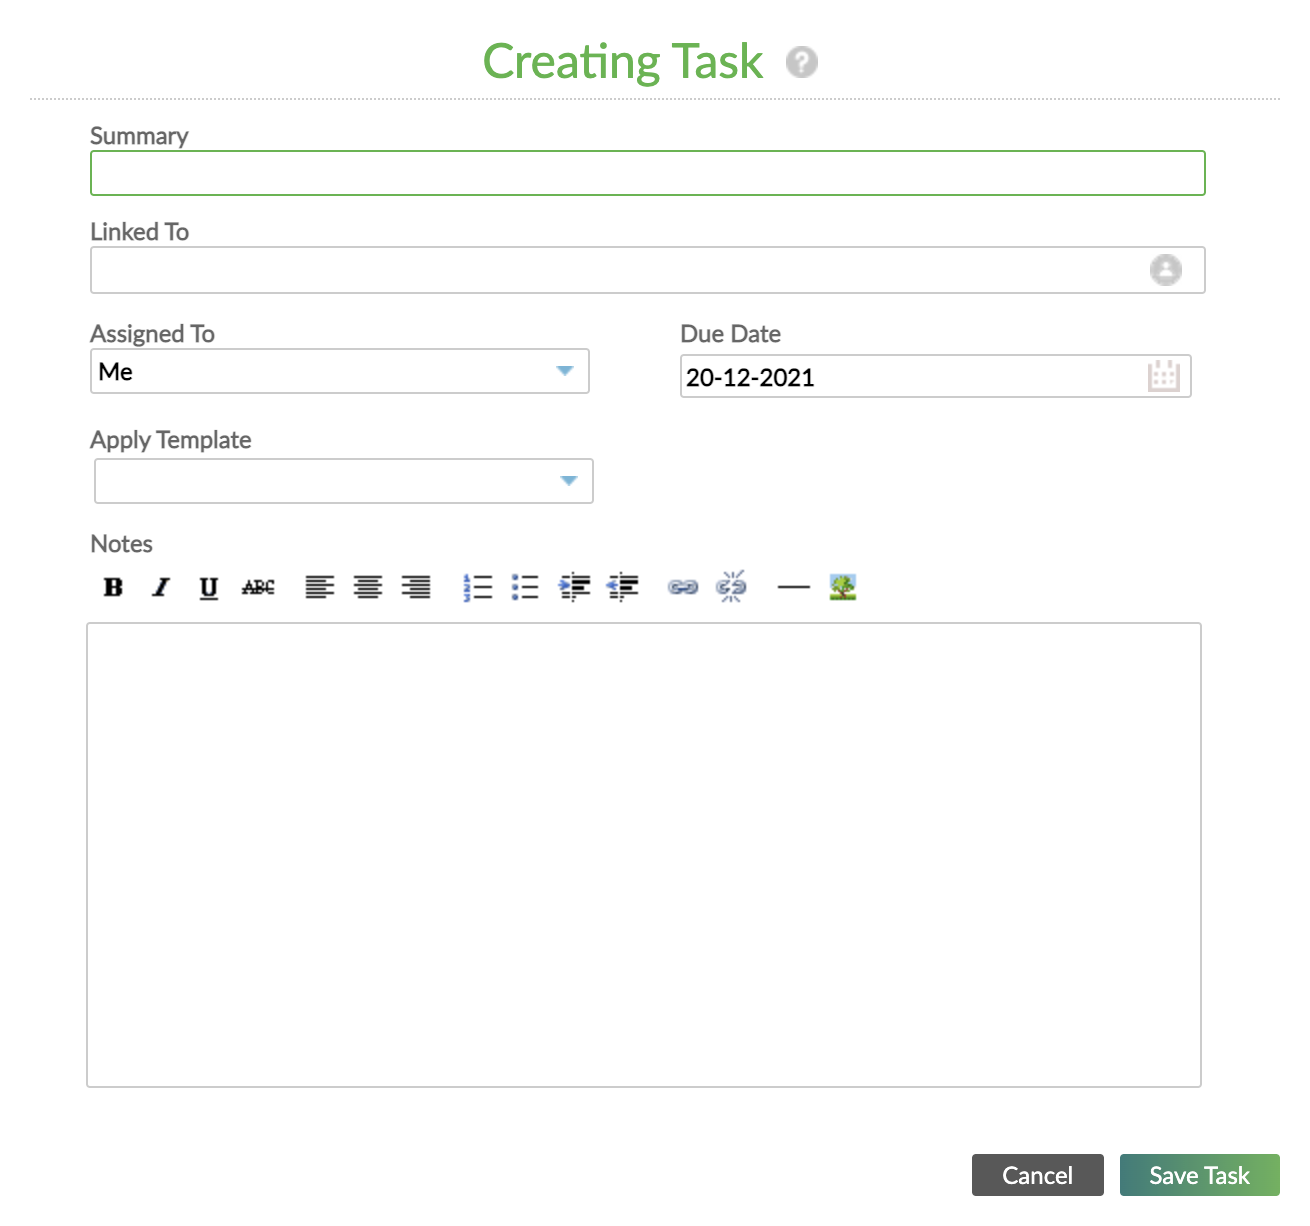 Creating Task form with Summary, Linked To, Assigned To, Due Date and Notes fields.